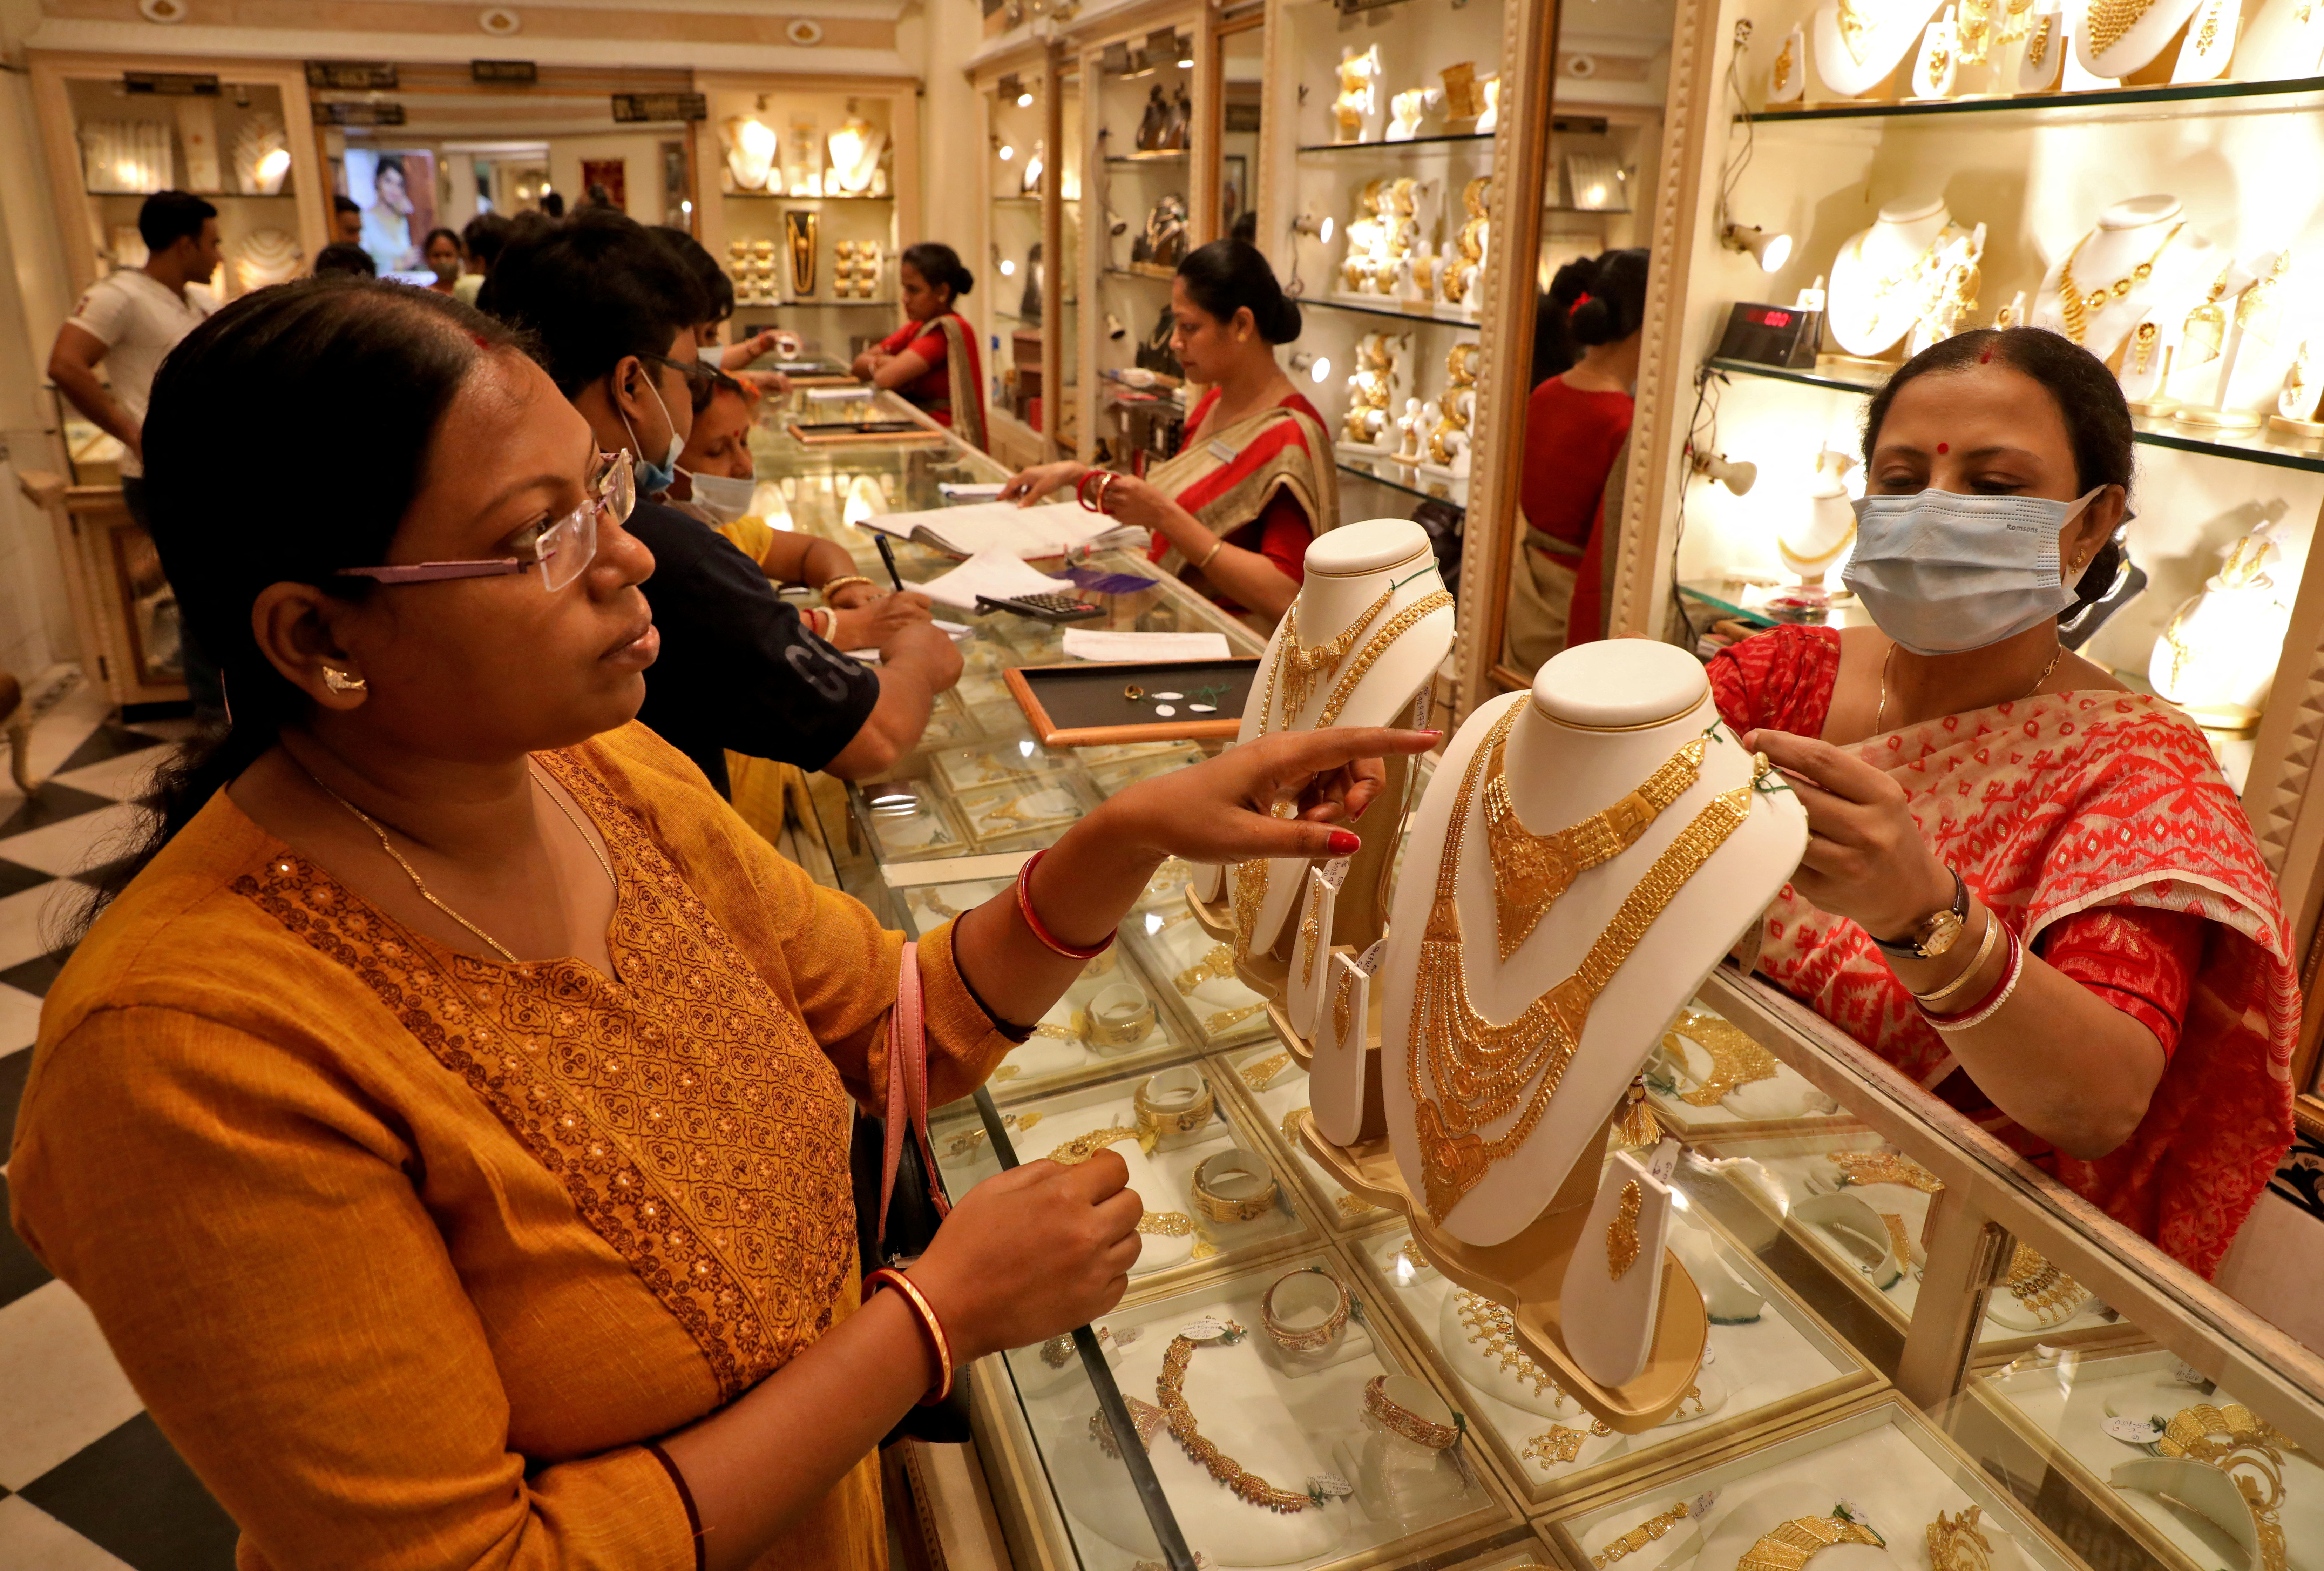 A customer checks a gold necklace before buying it at a jewellery showroom, in Kolkata